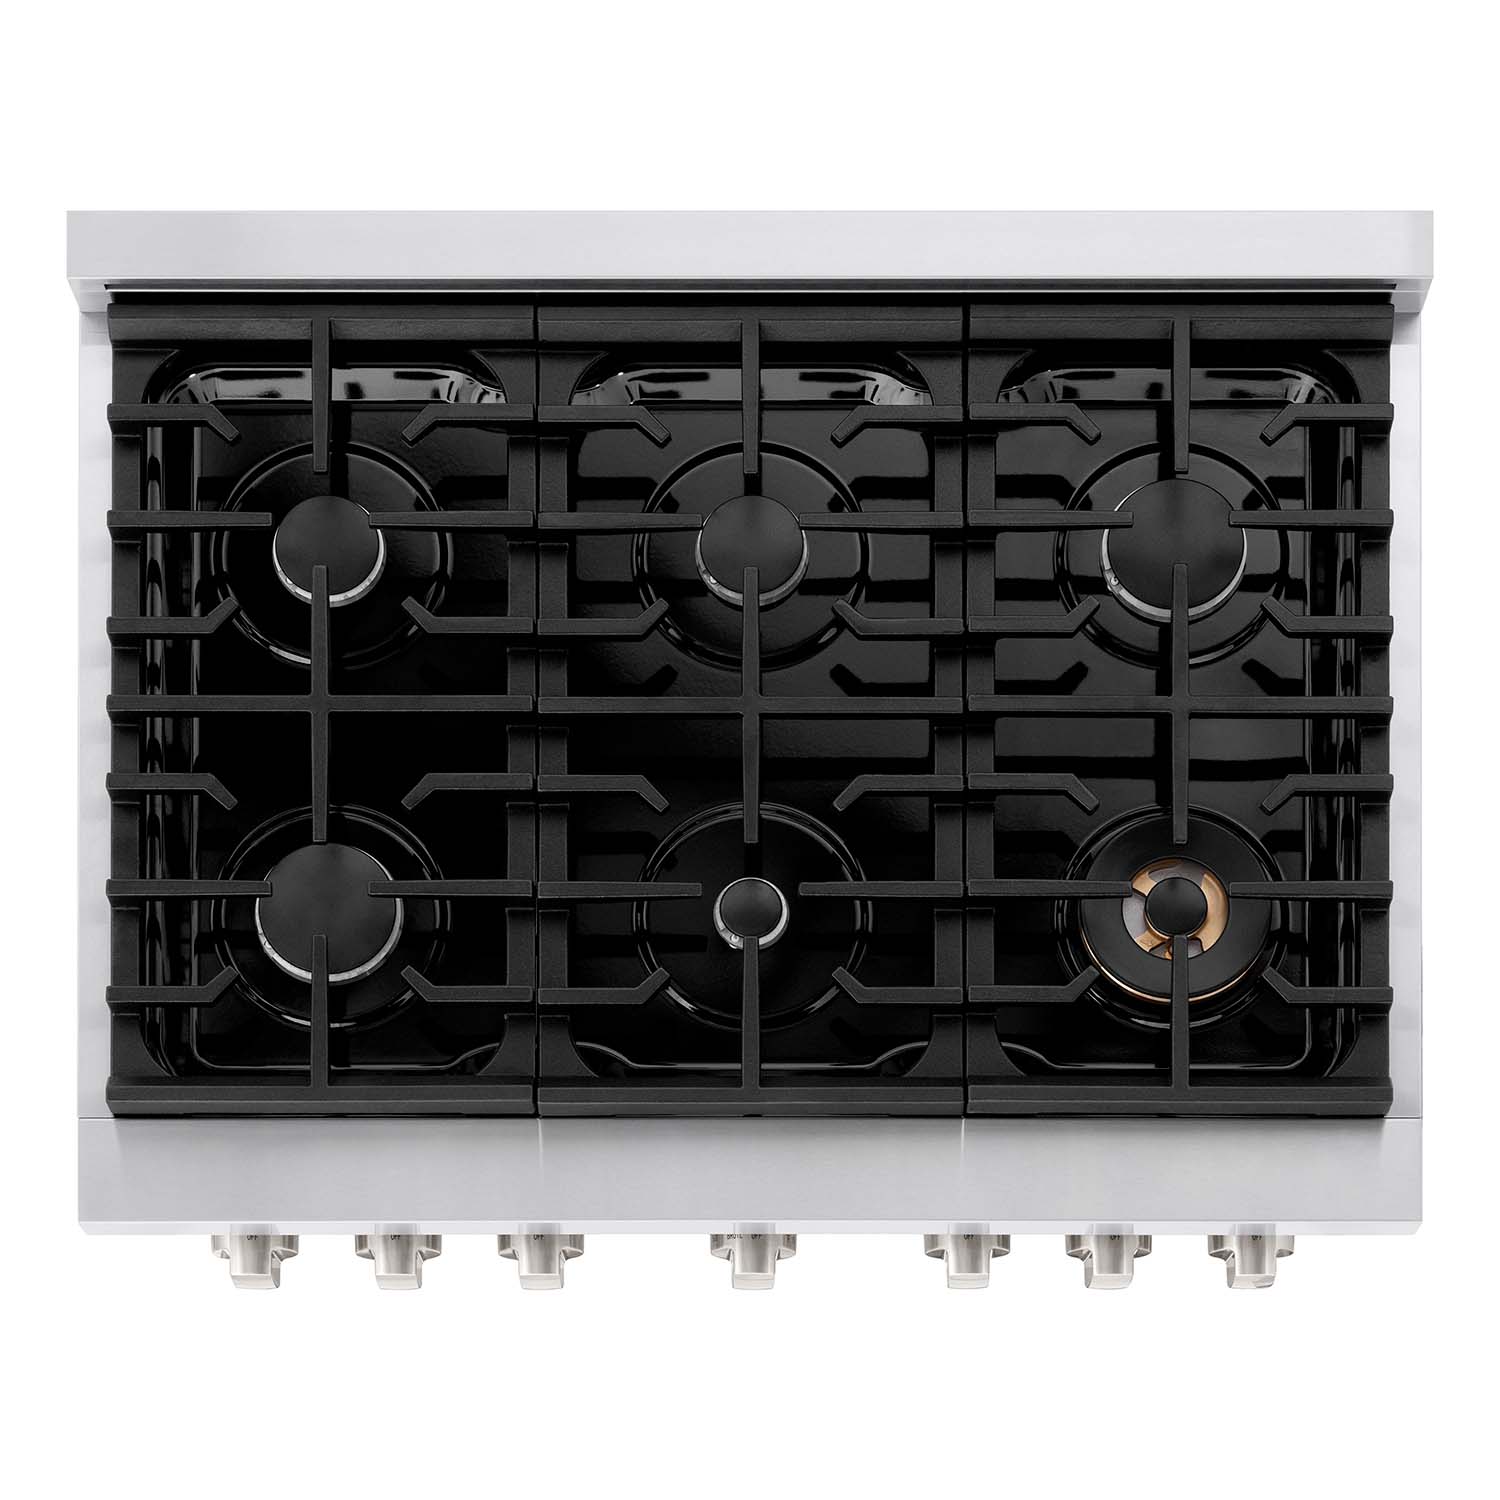 ZLINE 36 in. 5.2 cu. ft. 6 Burner Gas Range with Convection Gas Oven in Stainless Steel (SGR36) from above showing cooktop.